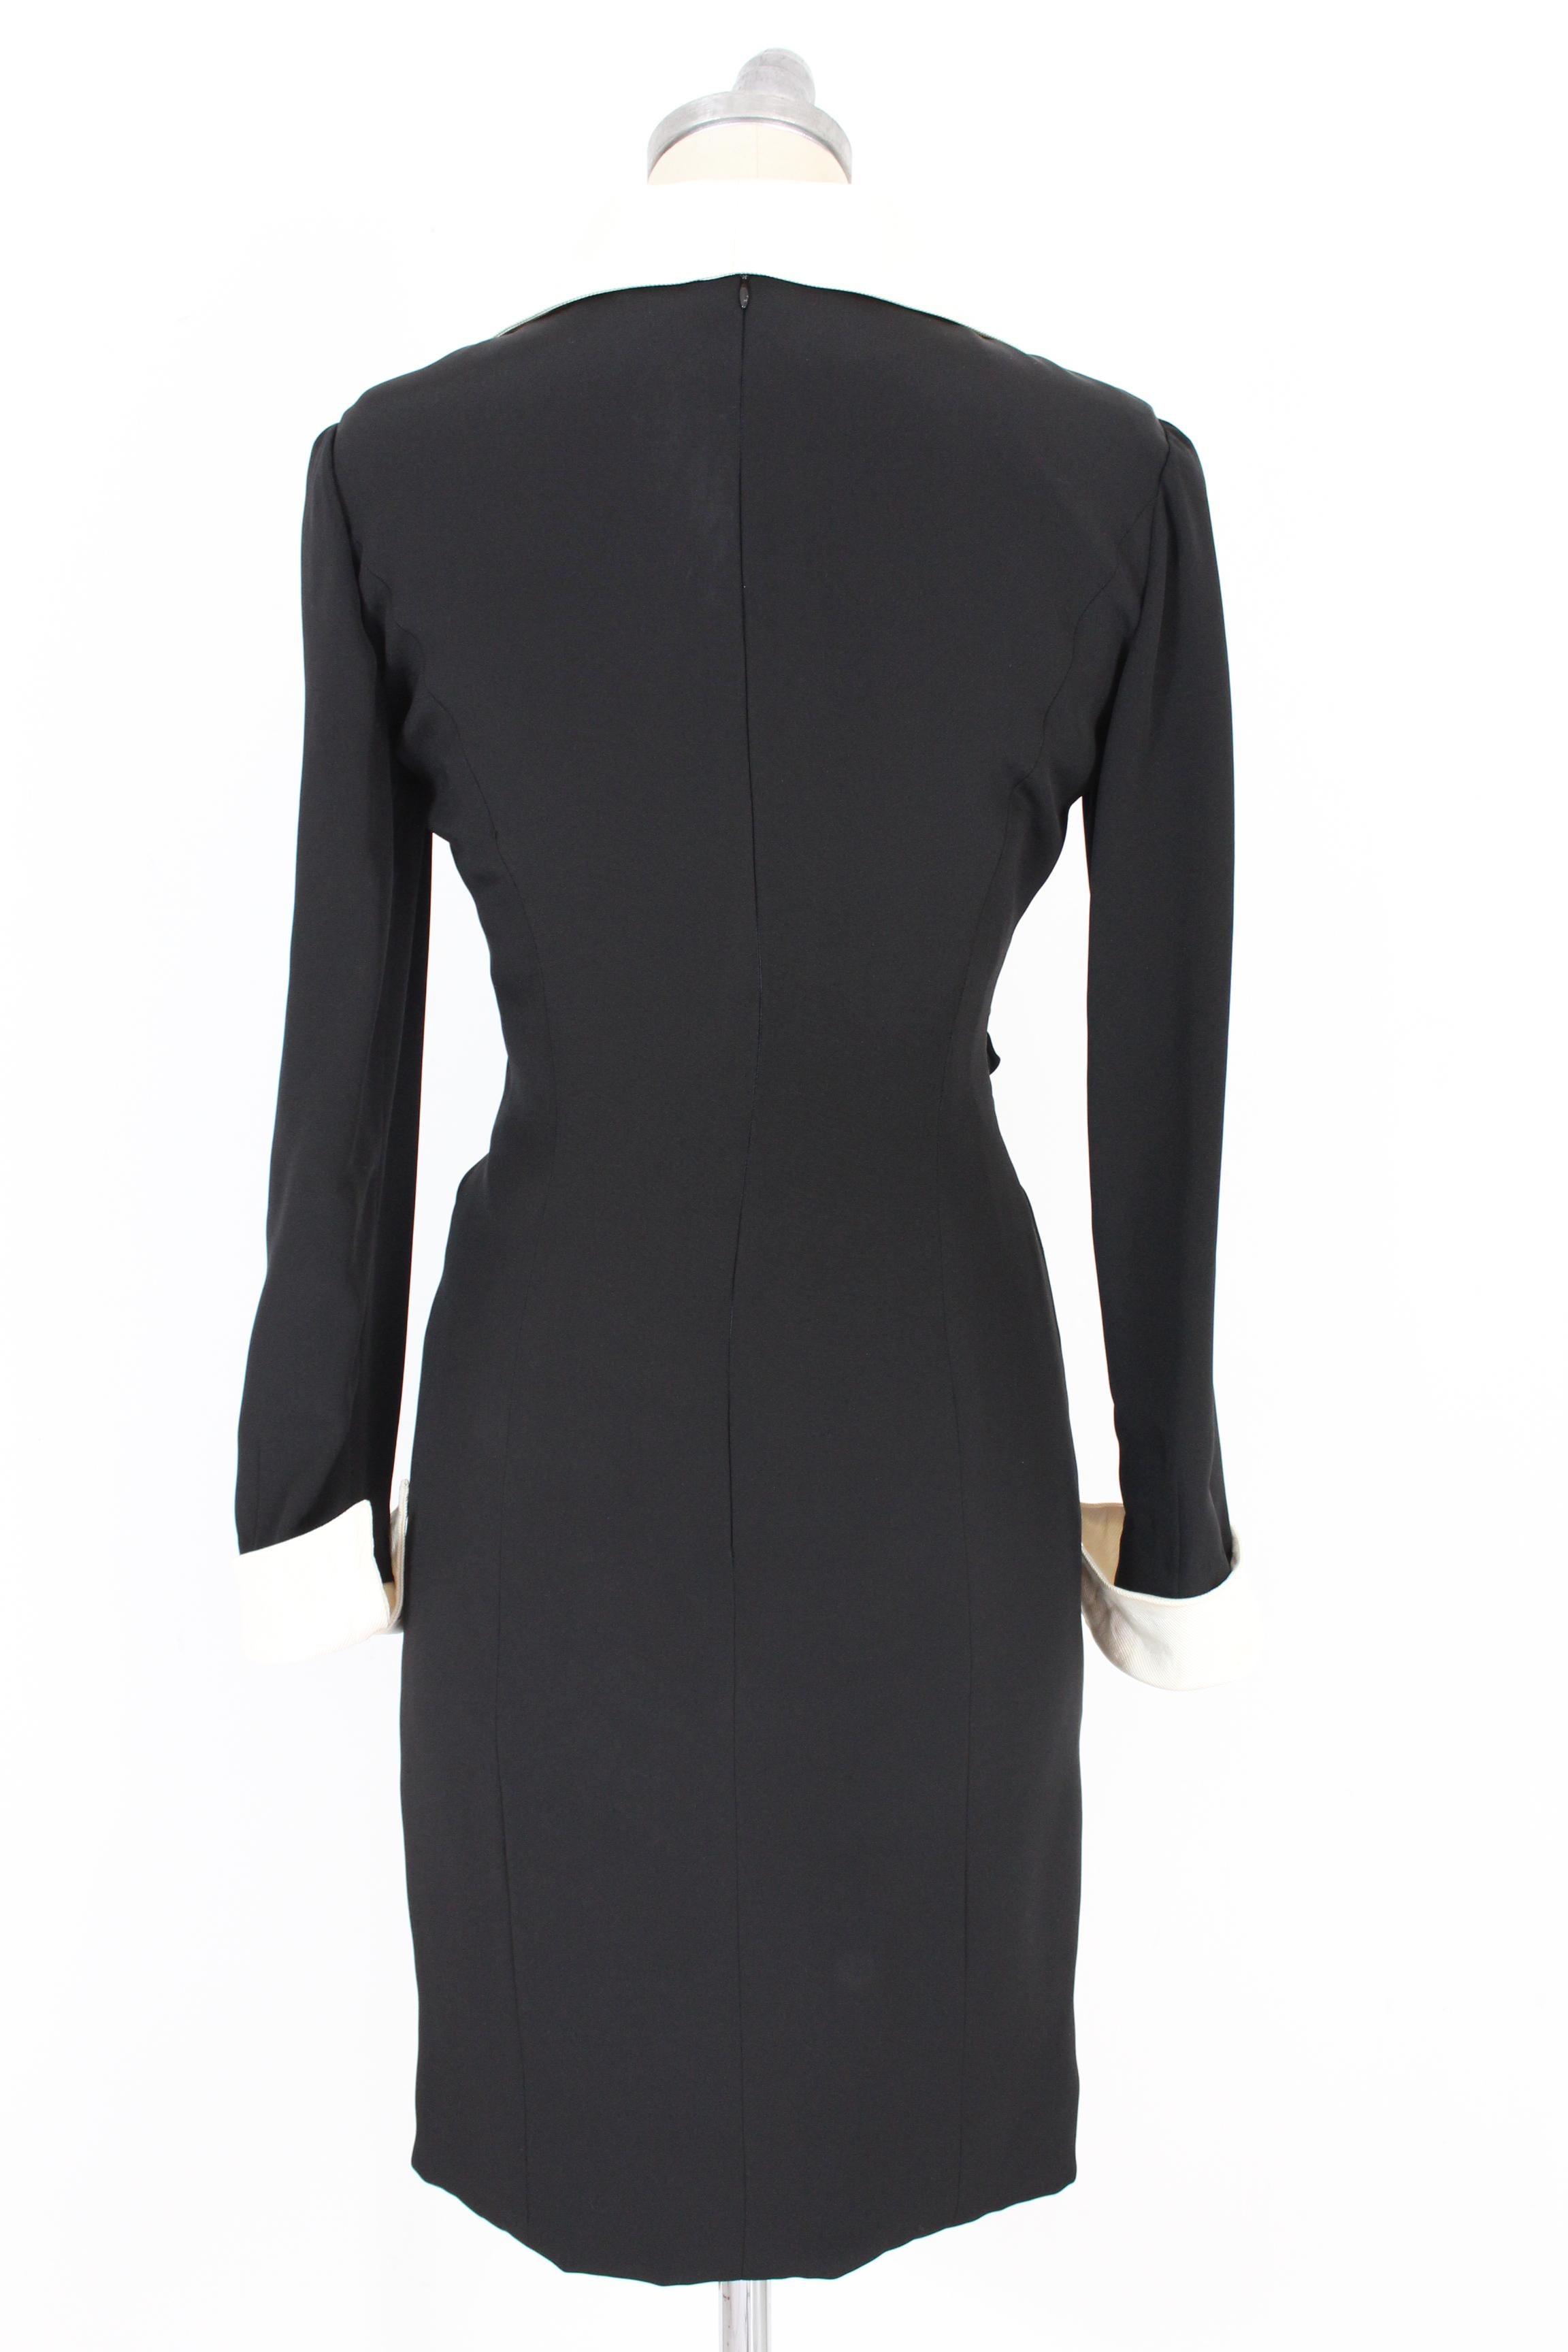 Louis Feraud vintage 90s woman dress. Black sheath dress, 100% silk. Tone-on-tone drapes at the waist. The dress has a beige collar and cuffs, removable with some clip buttons. Made in the USA. Excellent vintage condition.

Size: 42 It 8 Us 10